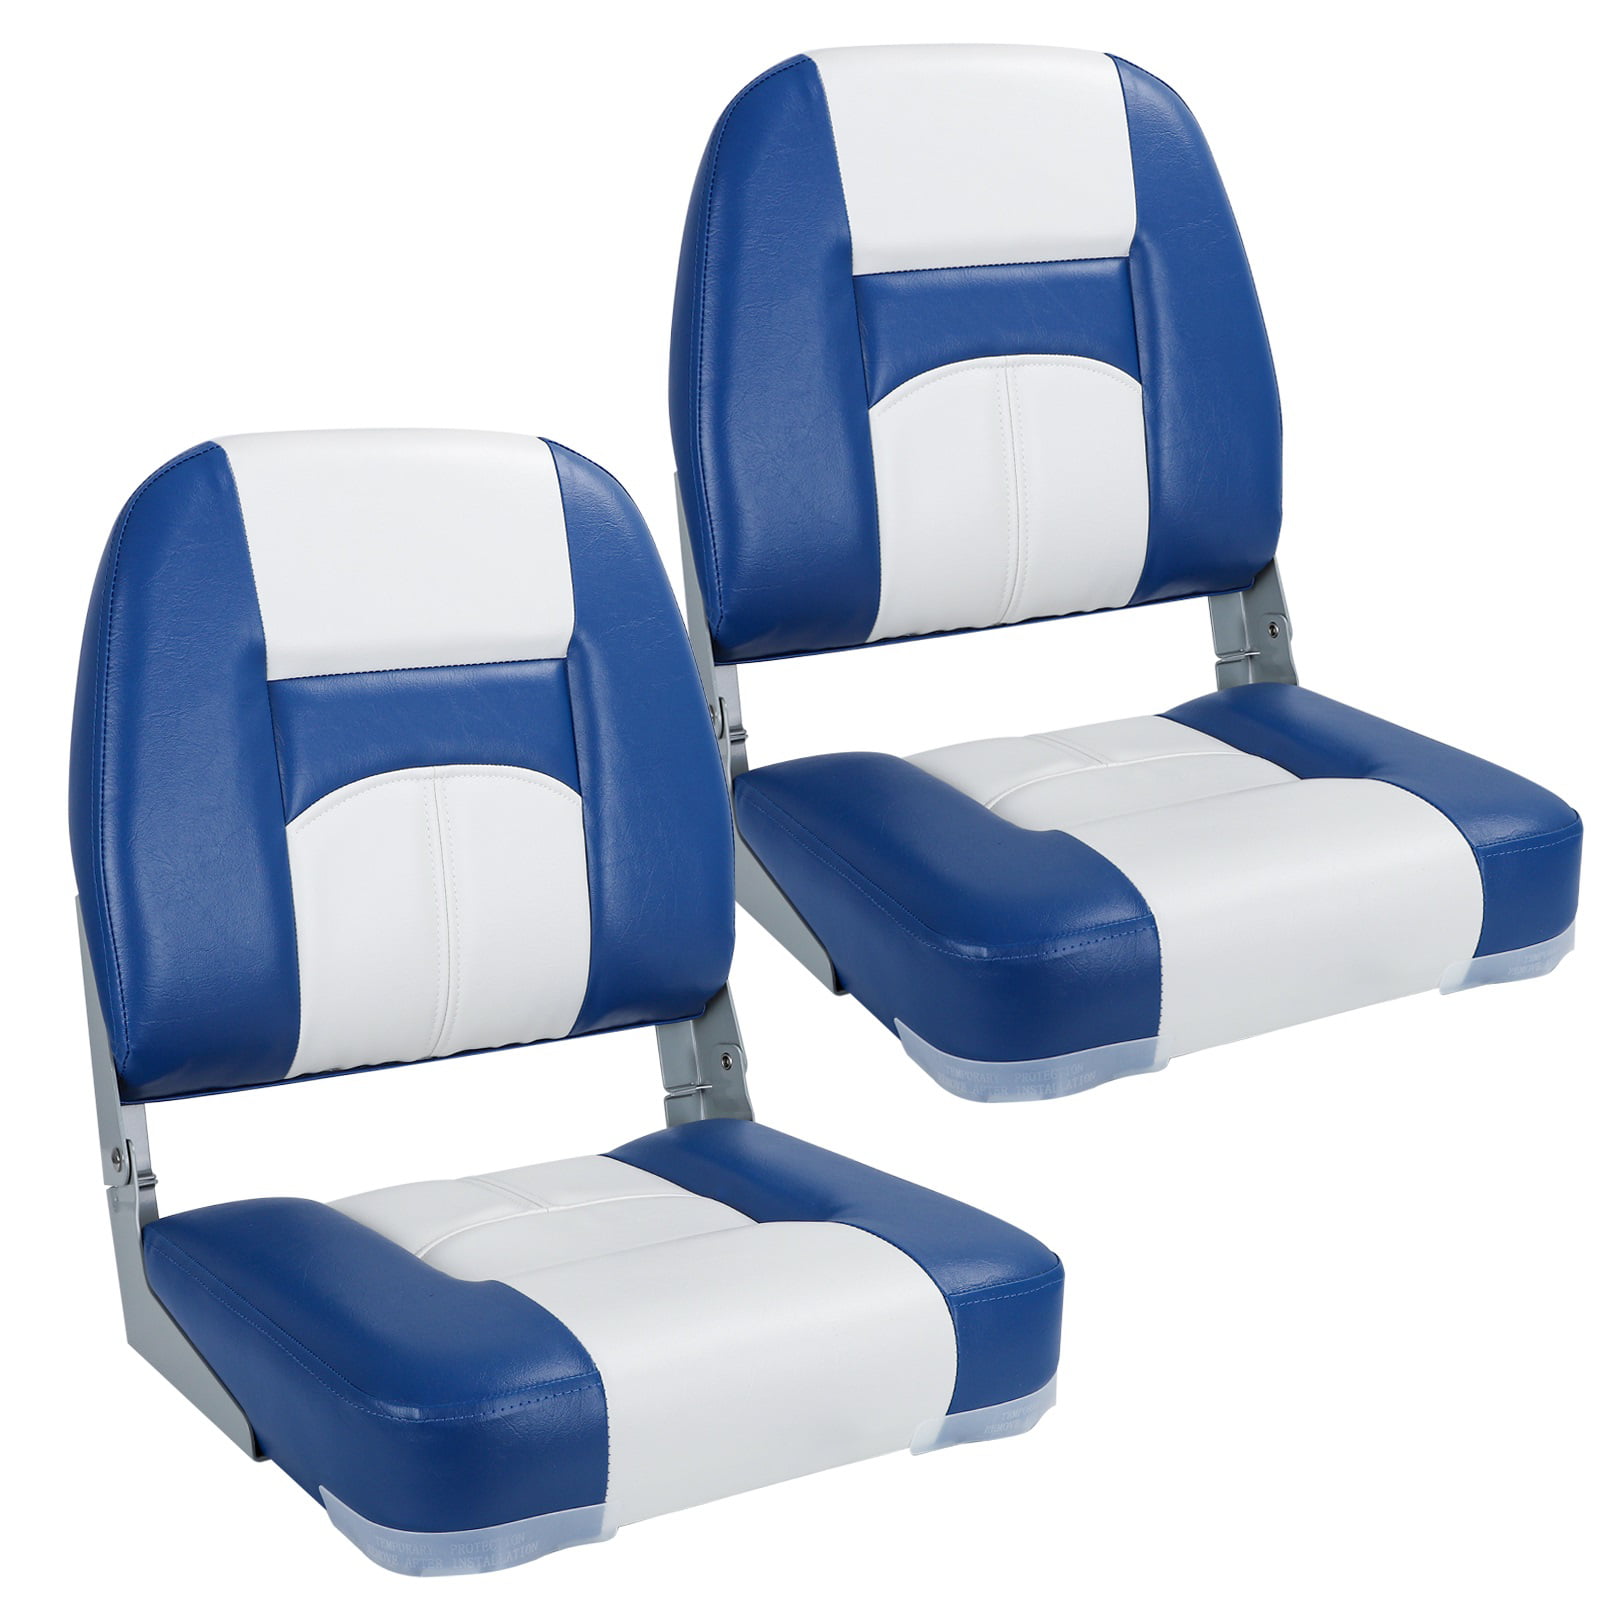 NORTHCAPTAIN Deluxe White/Pacific Blue Low Back Folding Boat Seat, Seats 